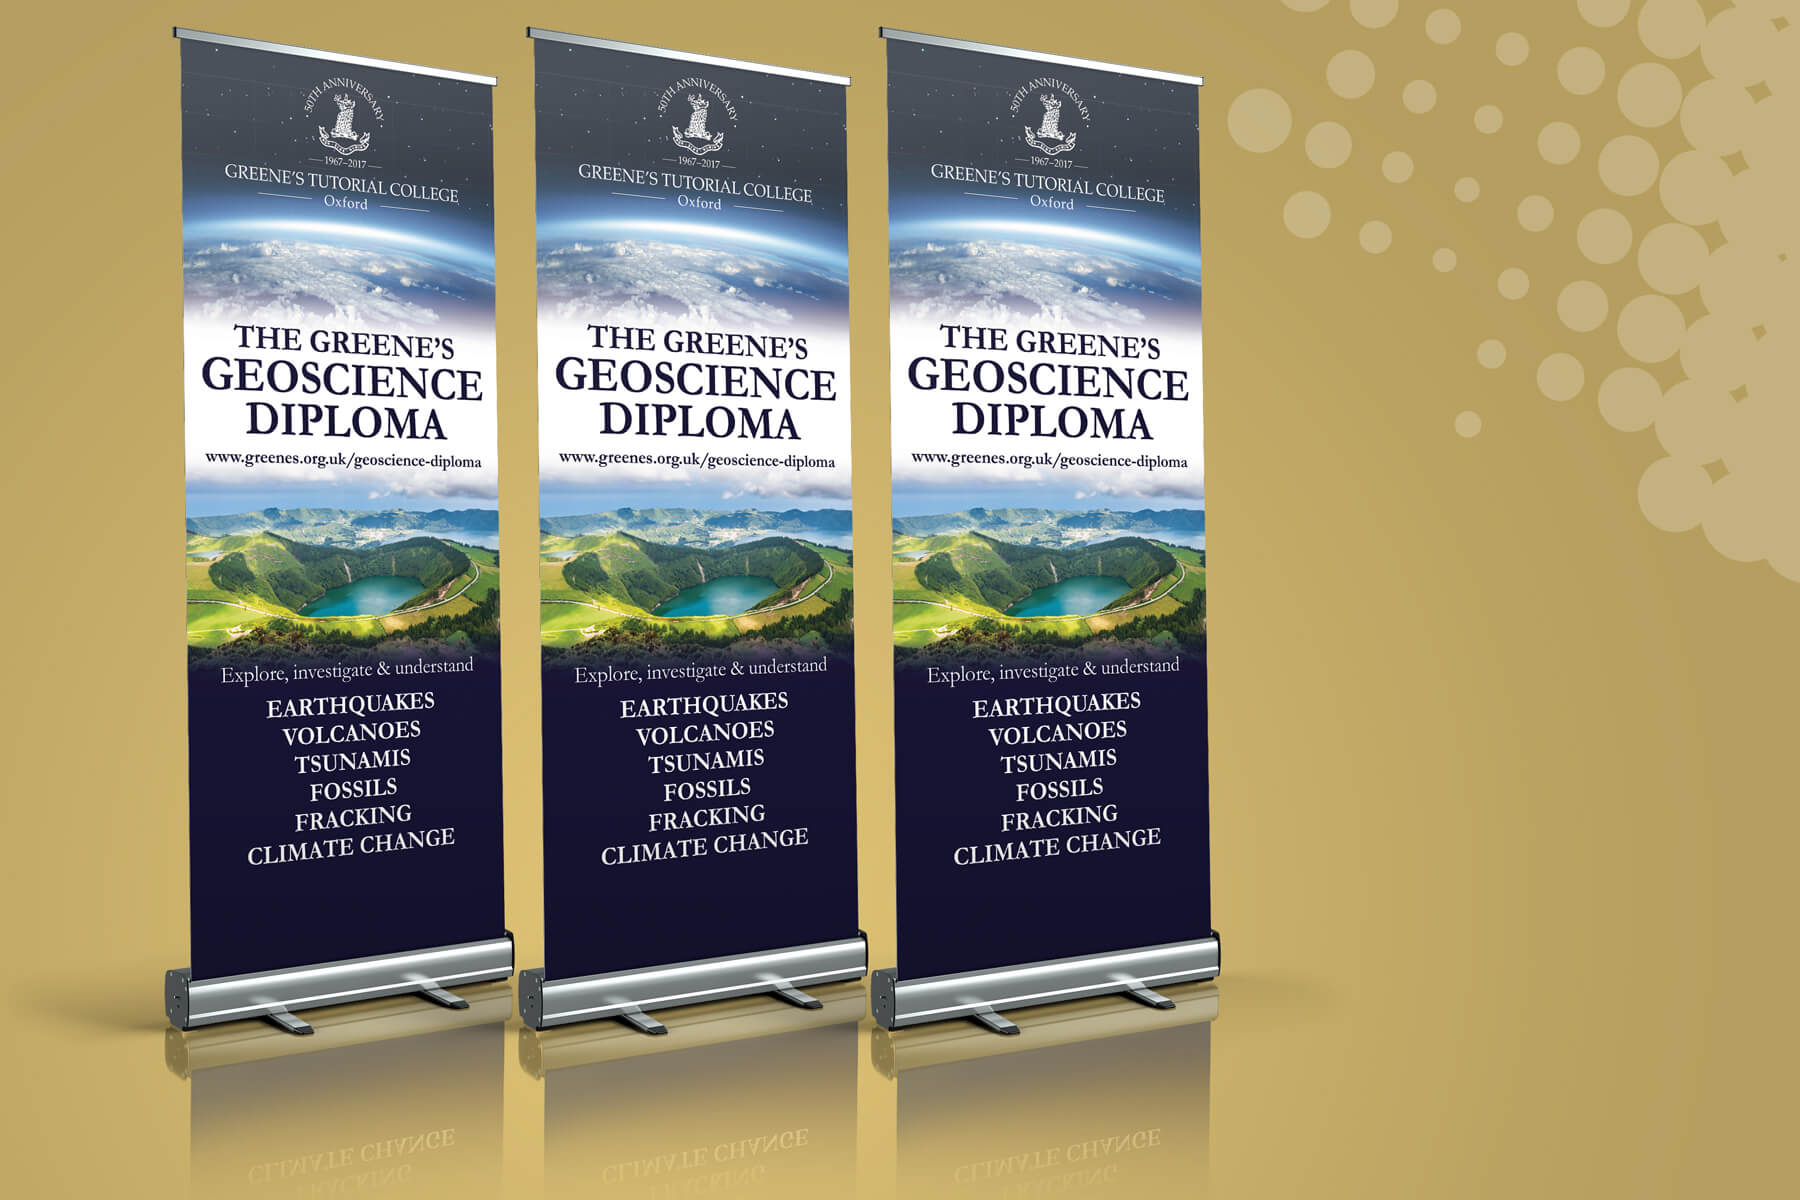 Pull up banners for Greene's Tutorial College Geoscience Diploma